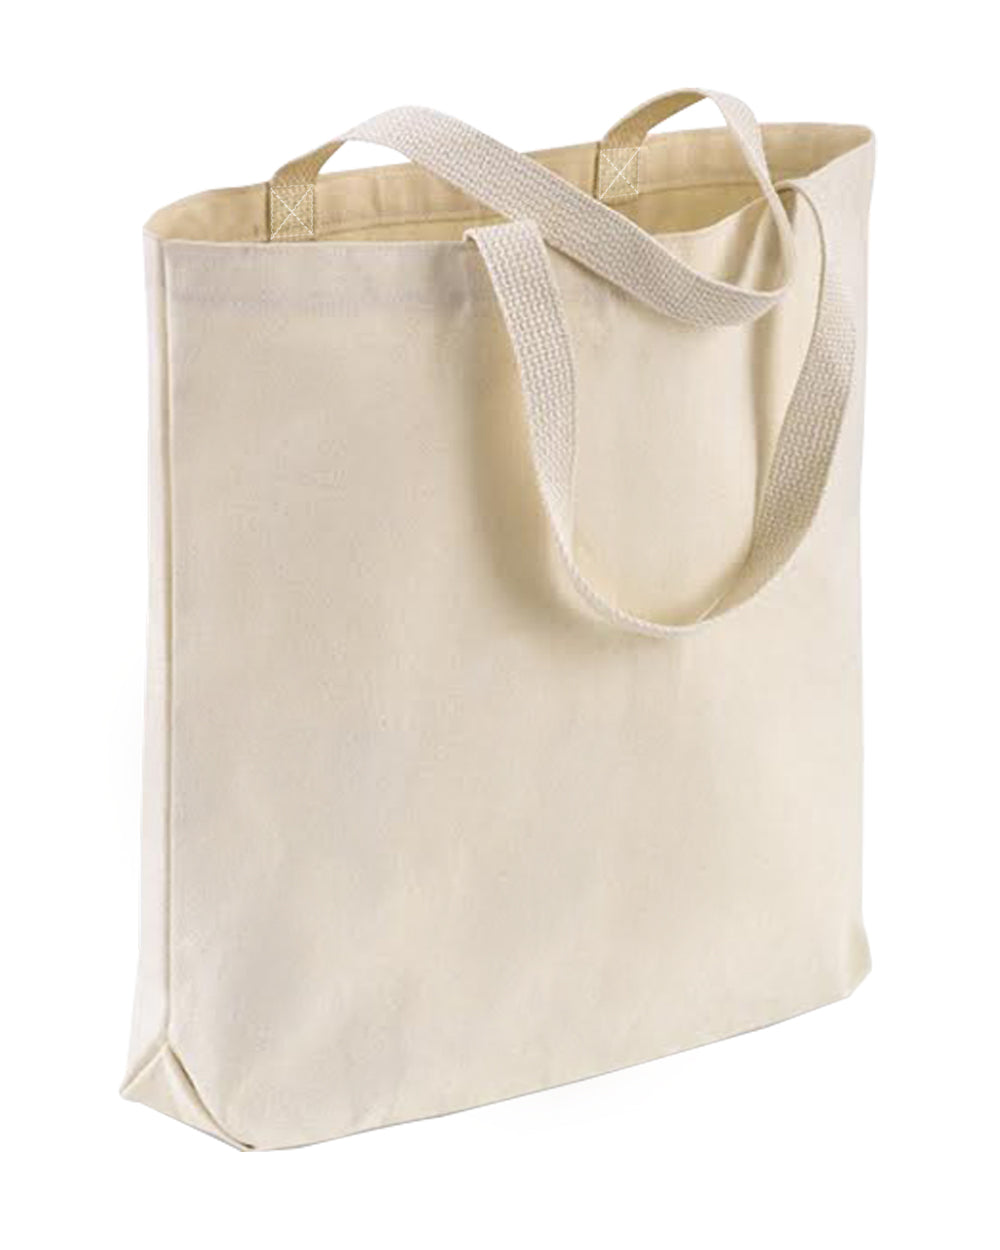 High Quality Promotional Canvas Bag w/Gusset - TG200